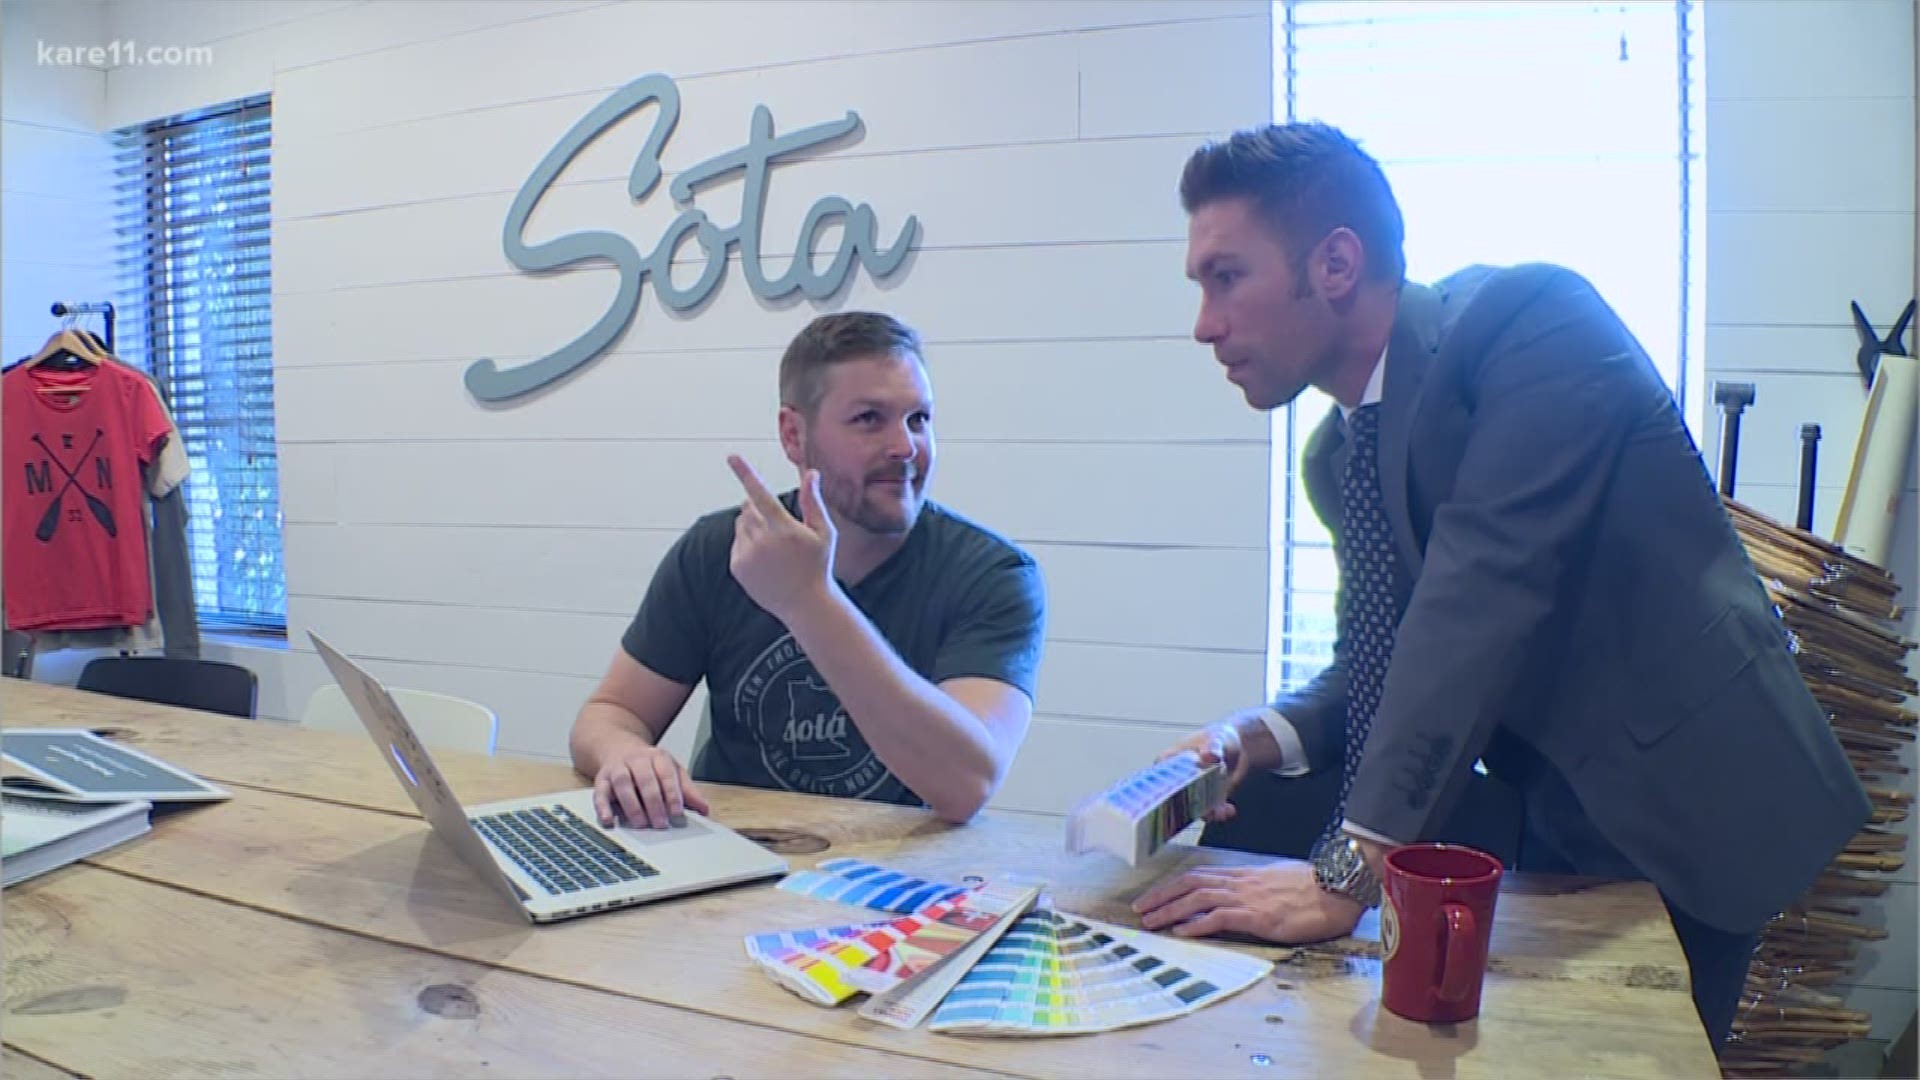 Reporter Zach Lashway met up with local SOTA brand creator Spencer Johnson to discuss their new clothing line.